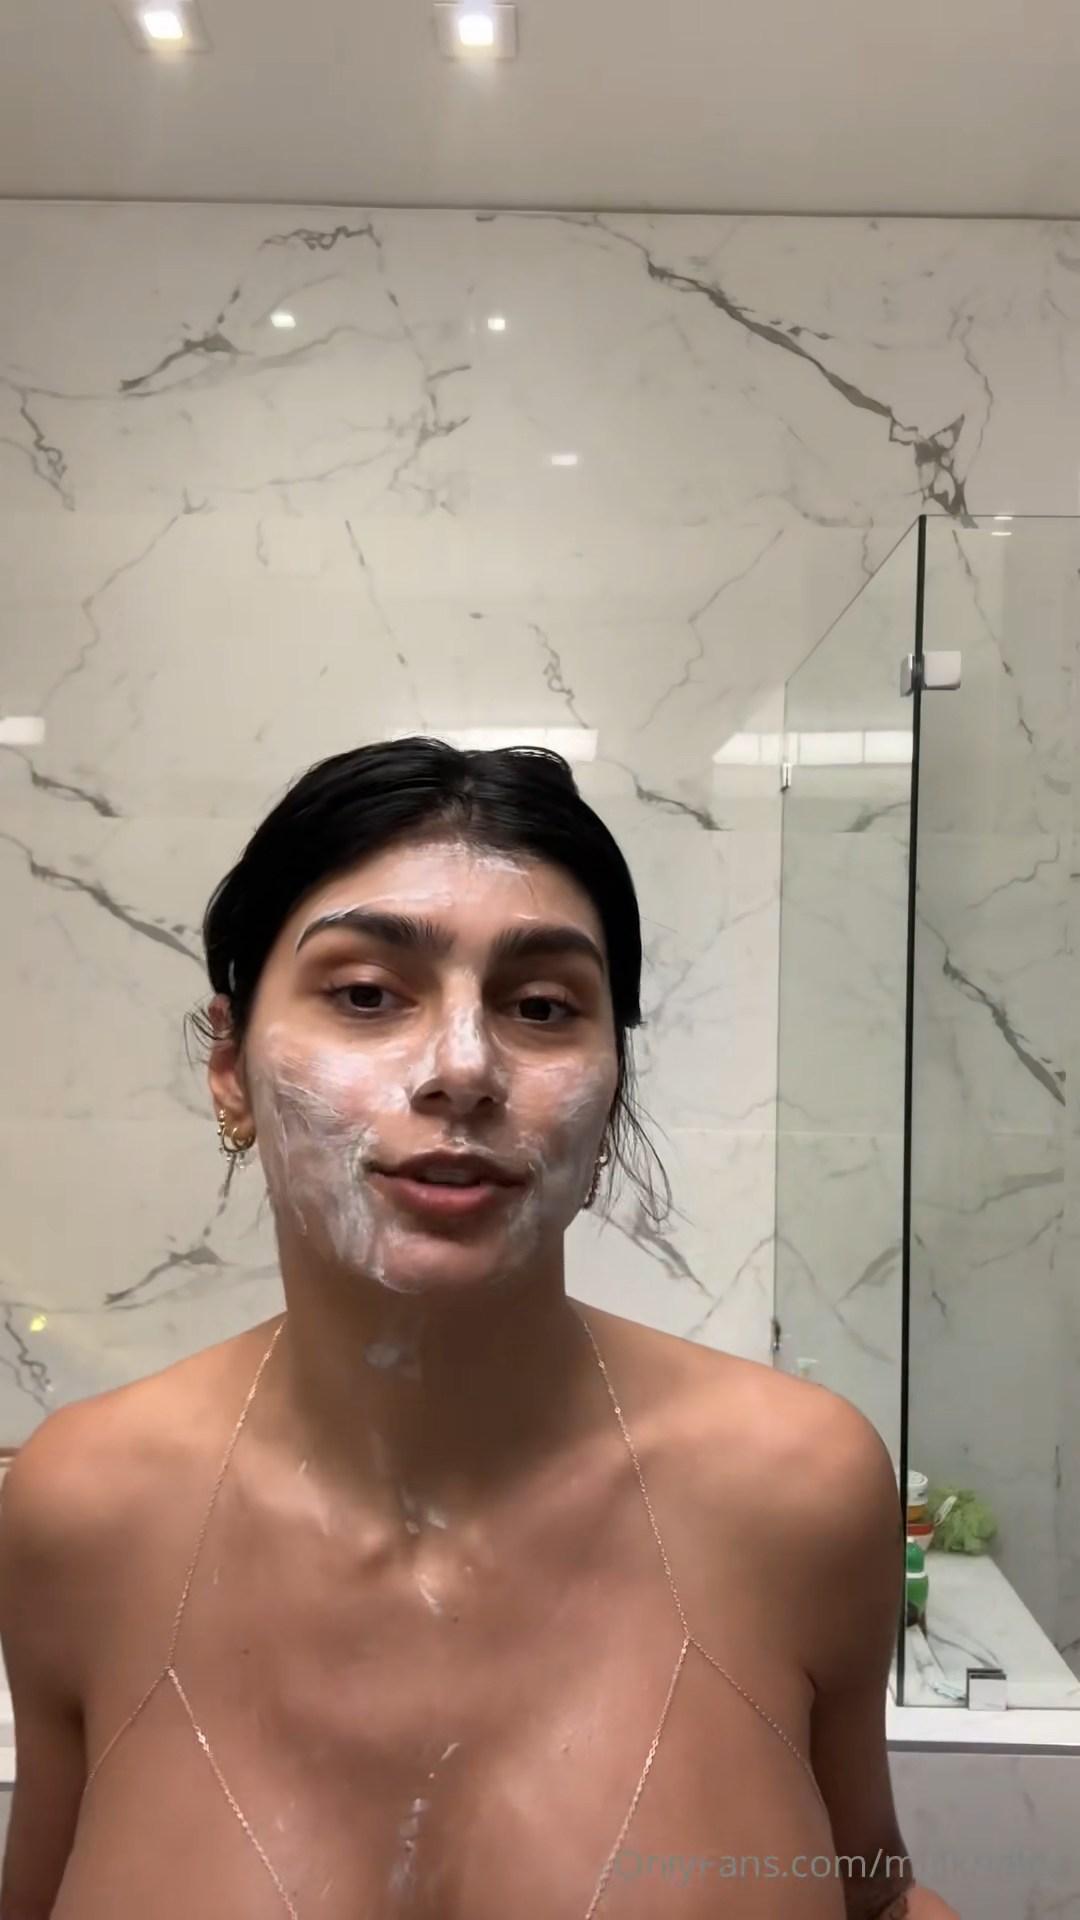 mia khalifa nude shower prep part 2 onlyfans video leaked